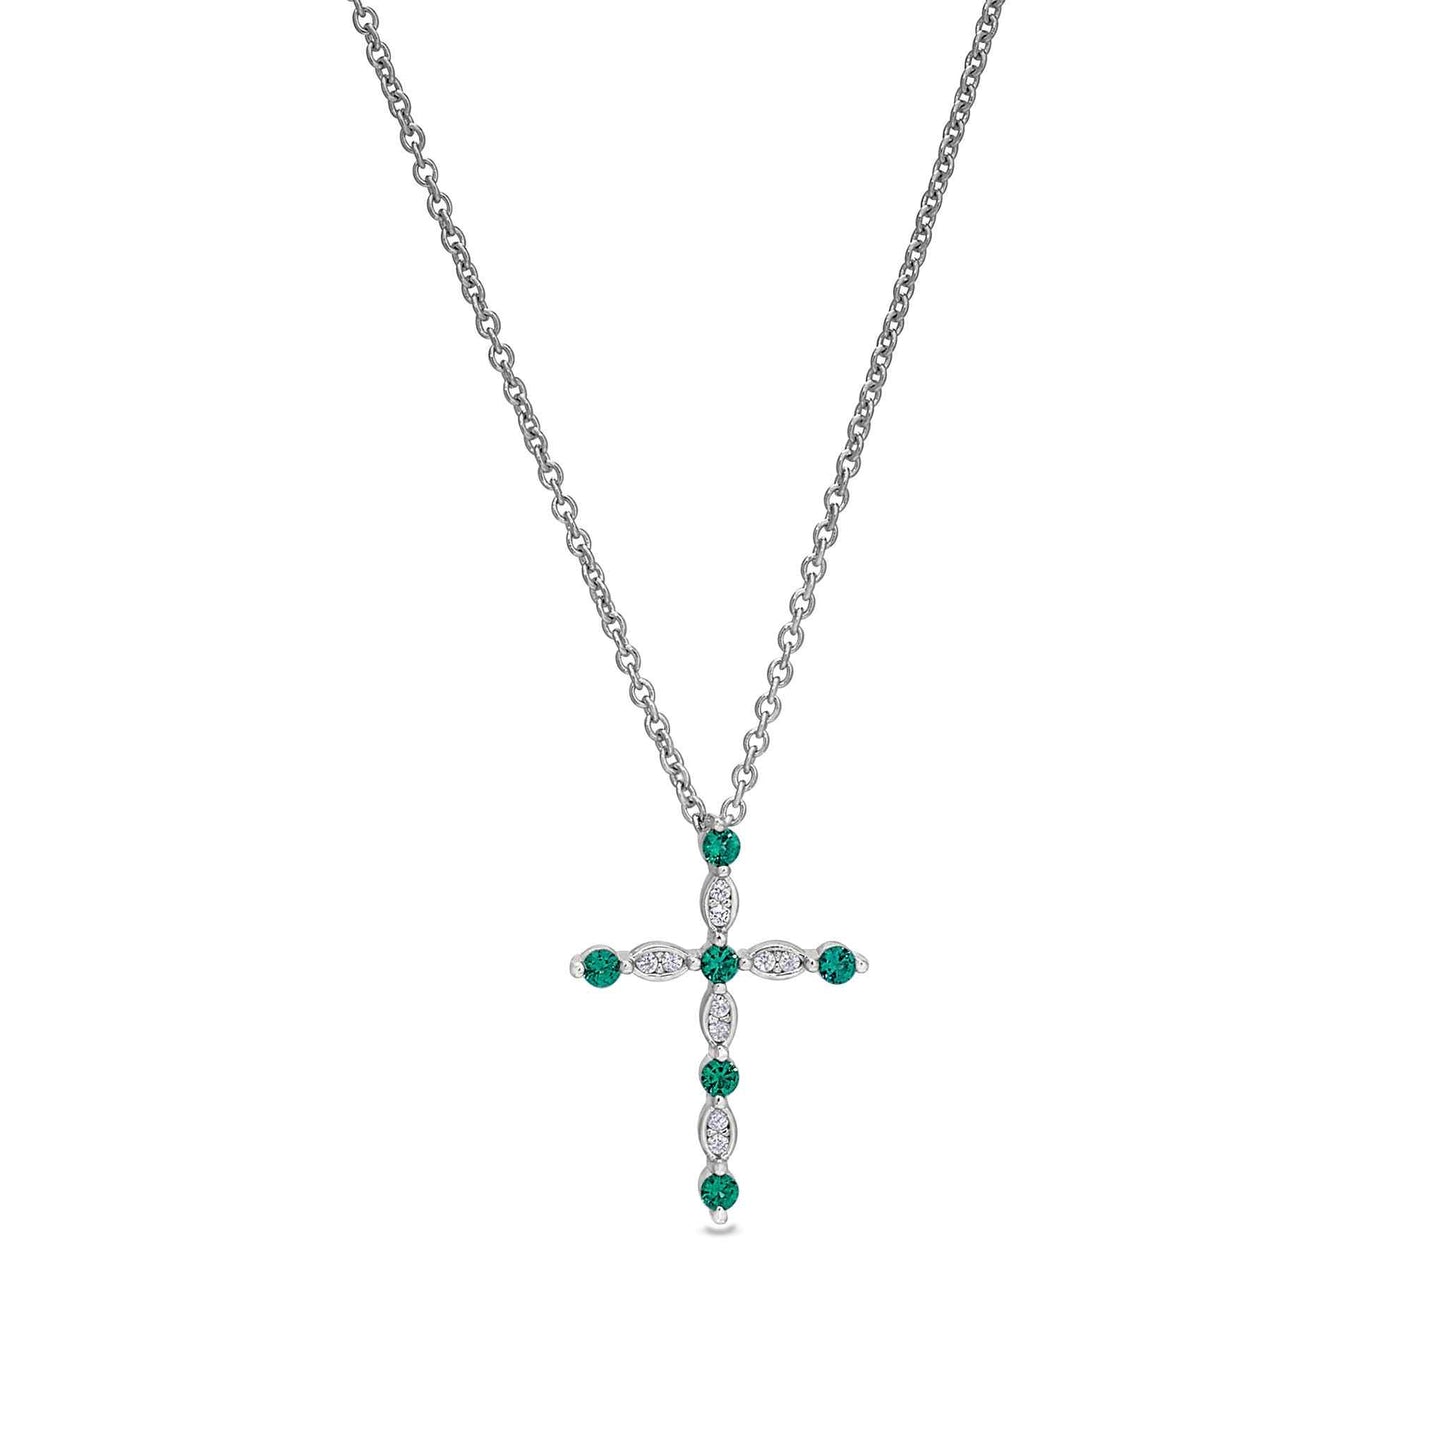 A cross necklace with simulated diamonds displayed on a neutral white background.